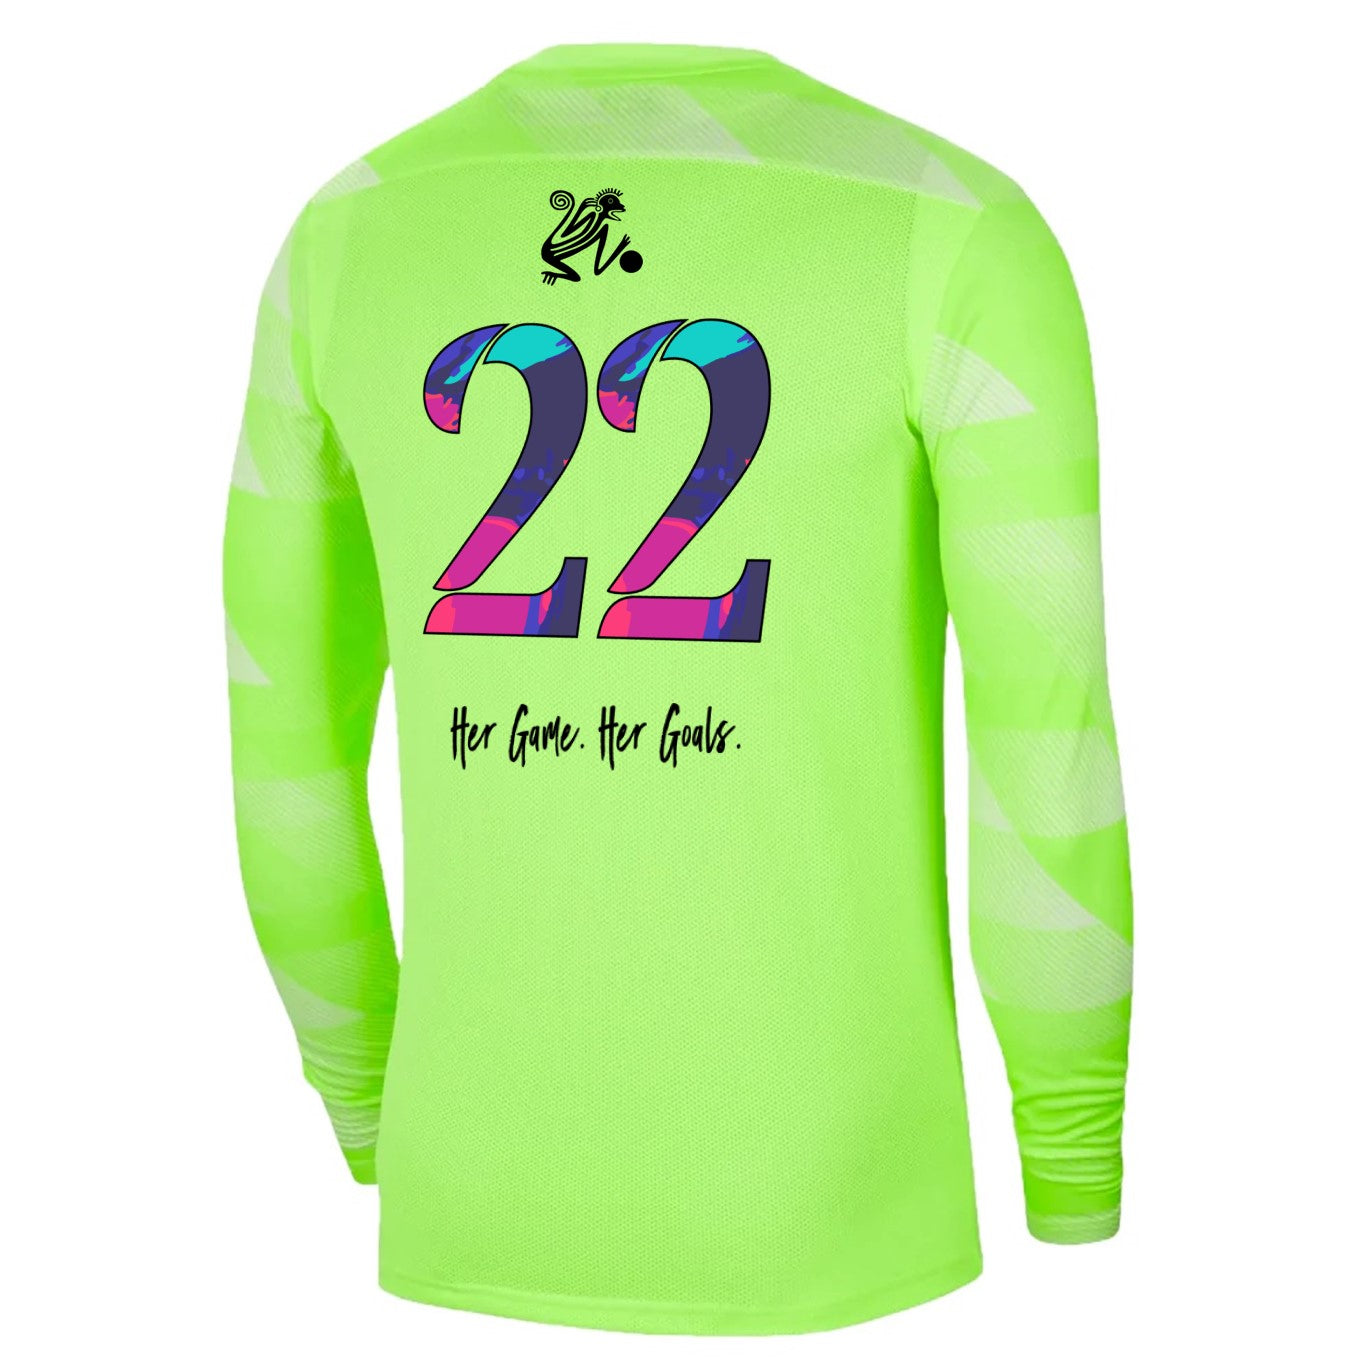 Indie Chicas GK Jersey [Youth]